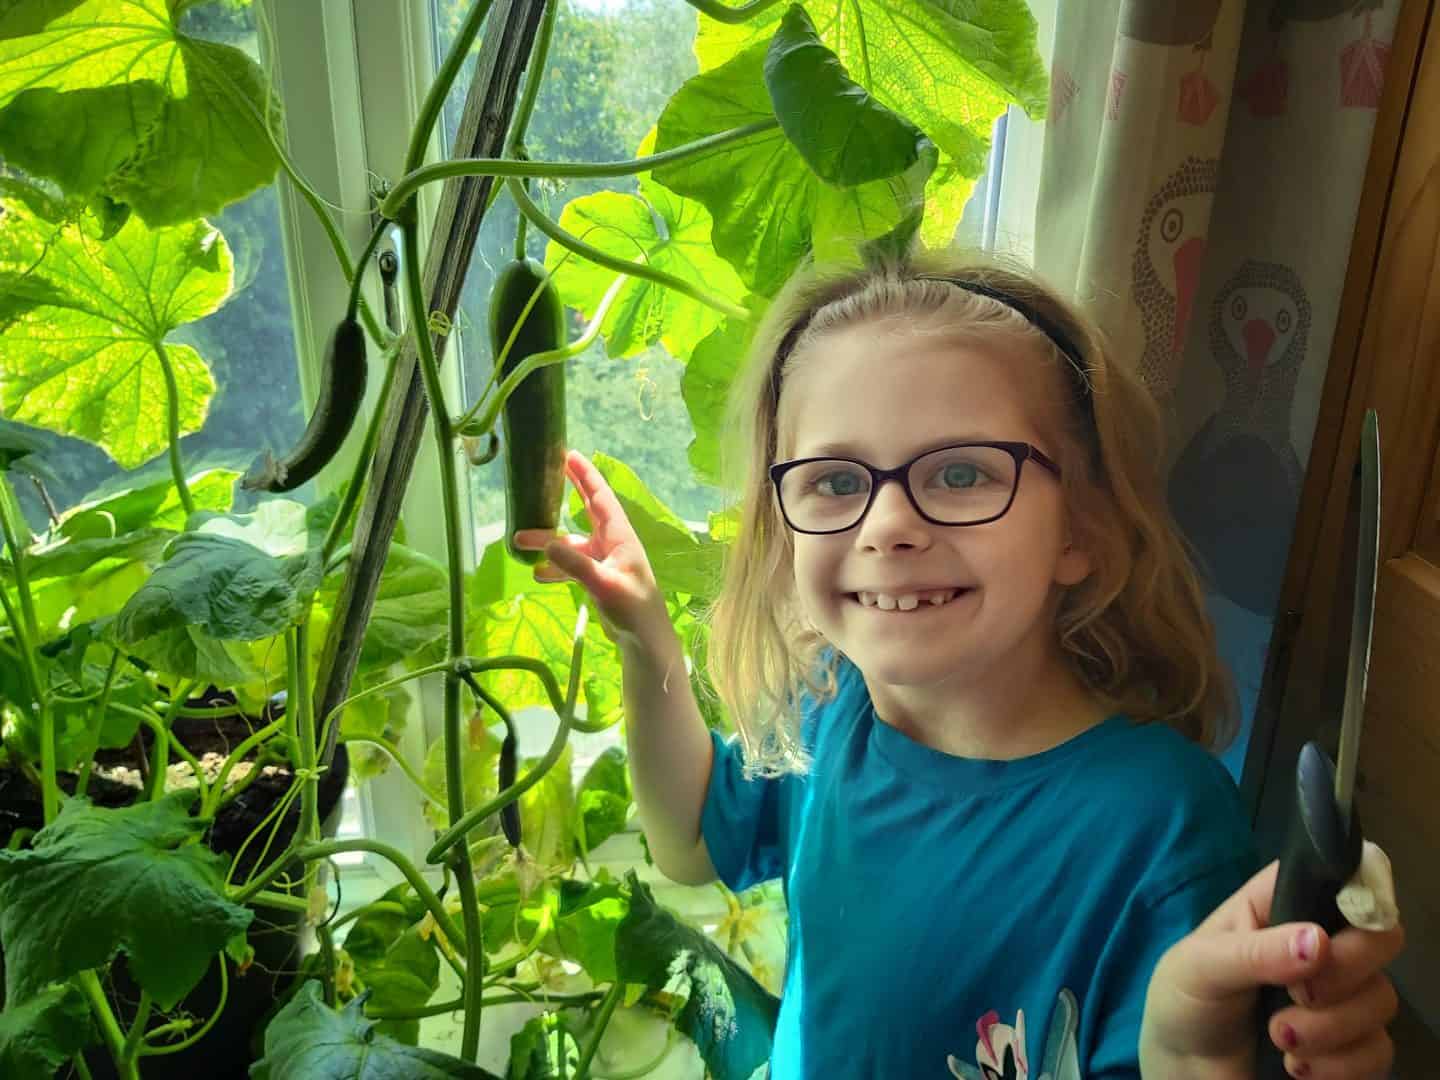 Little girl being eco friendly by growing cucumbers on the windowsill.